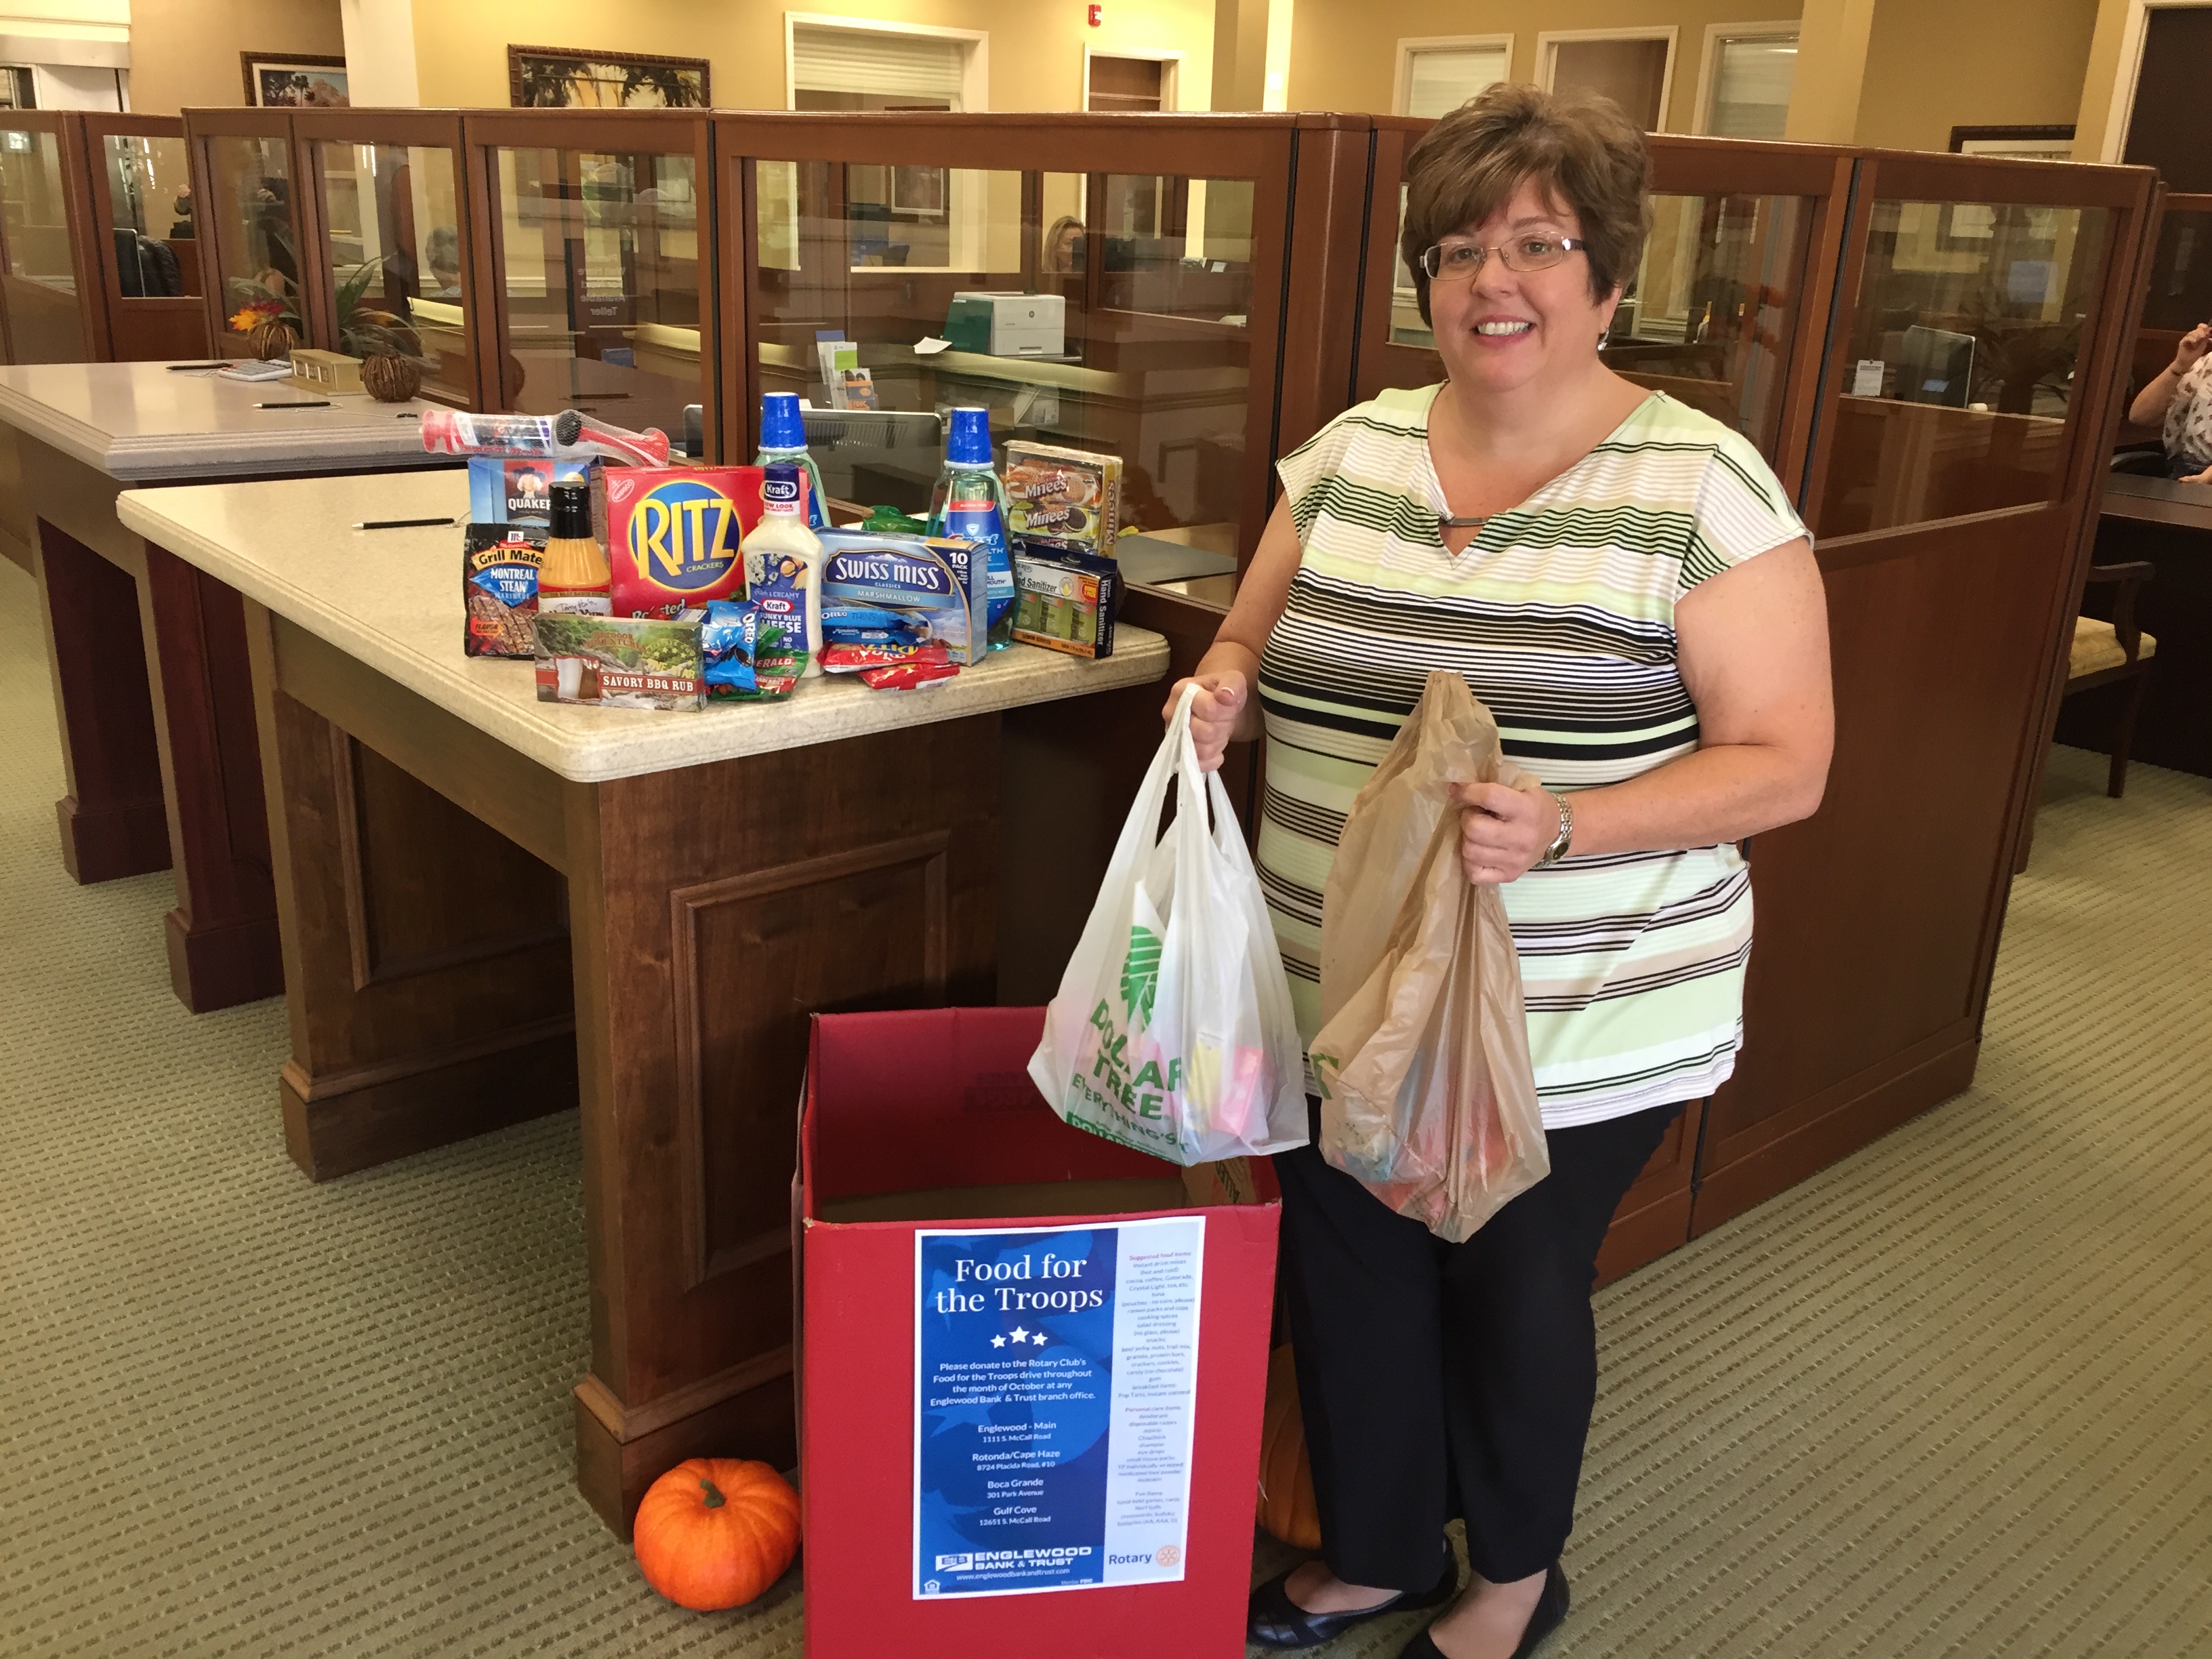 Kristina Watts, VP, Business Relationship Banker at Englewood Bank & Trust pictured with donations for Food for the Troops. People may donate during business hours at Englewood Bank & Trust through October 23.